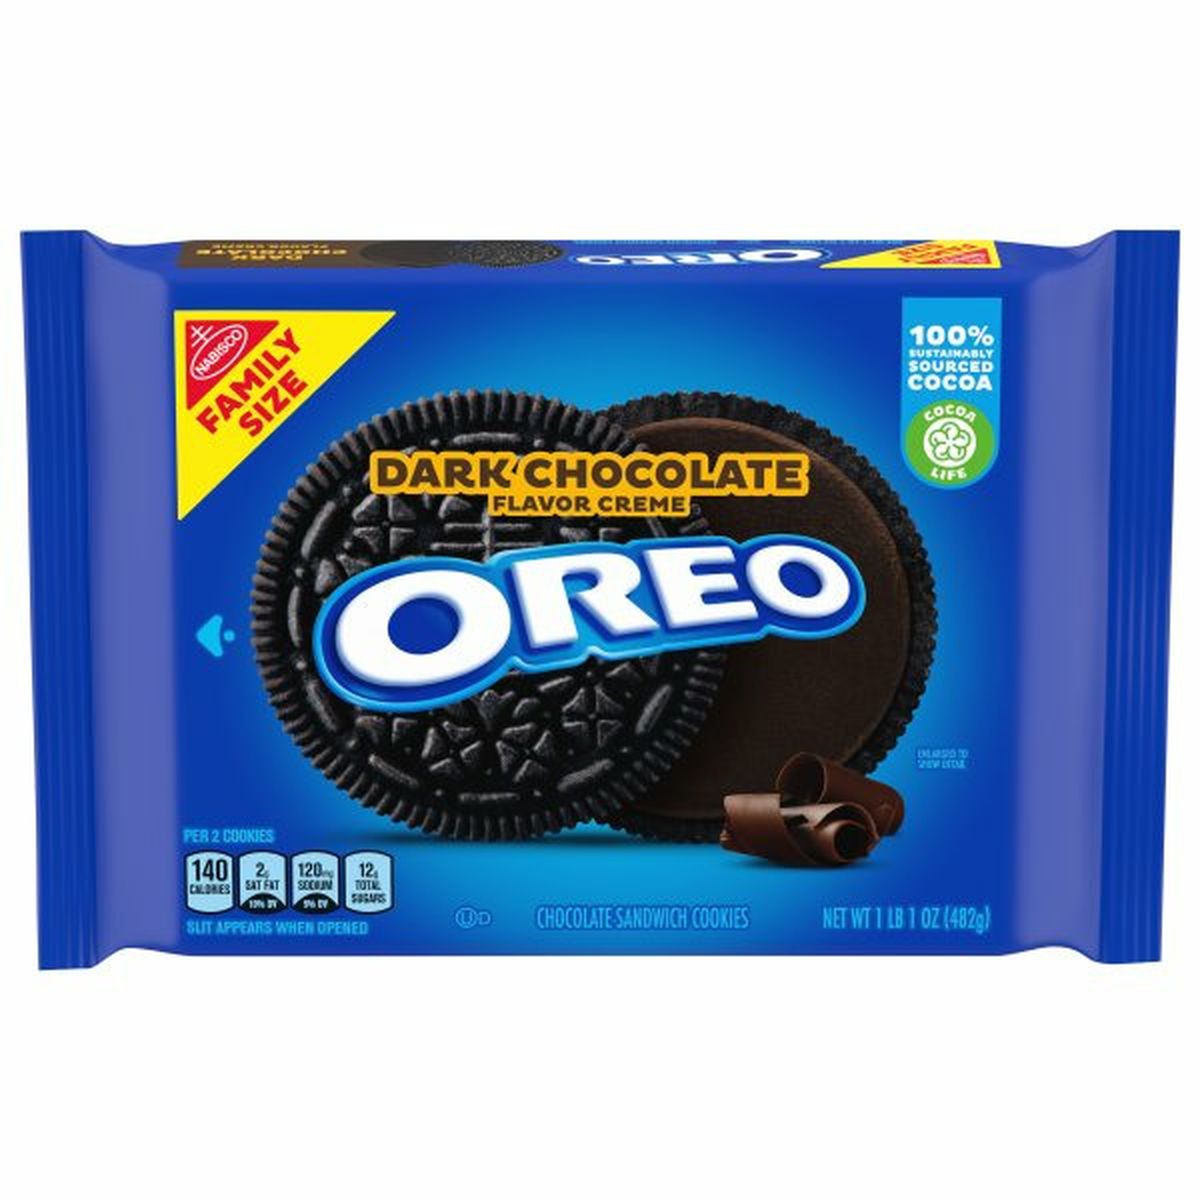 Calories in Nabisco Chocolate Sandwich Cookies, Dark Chocolate Flavor Creme, Family Size